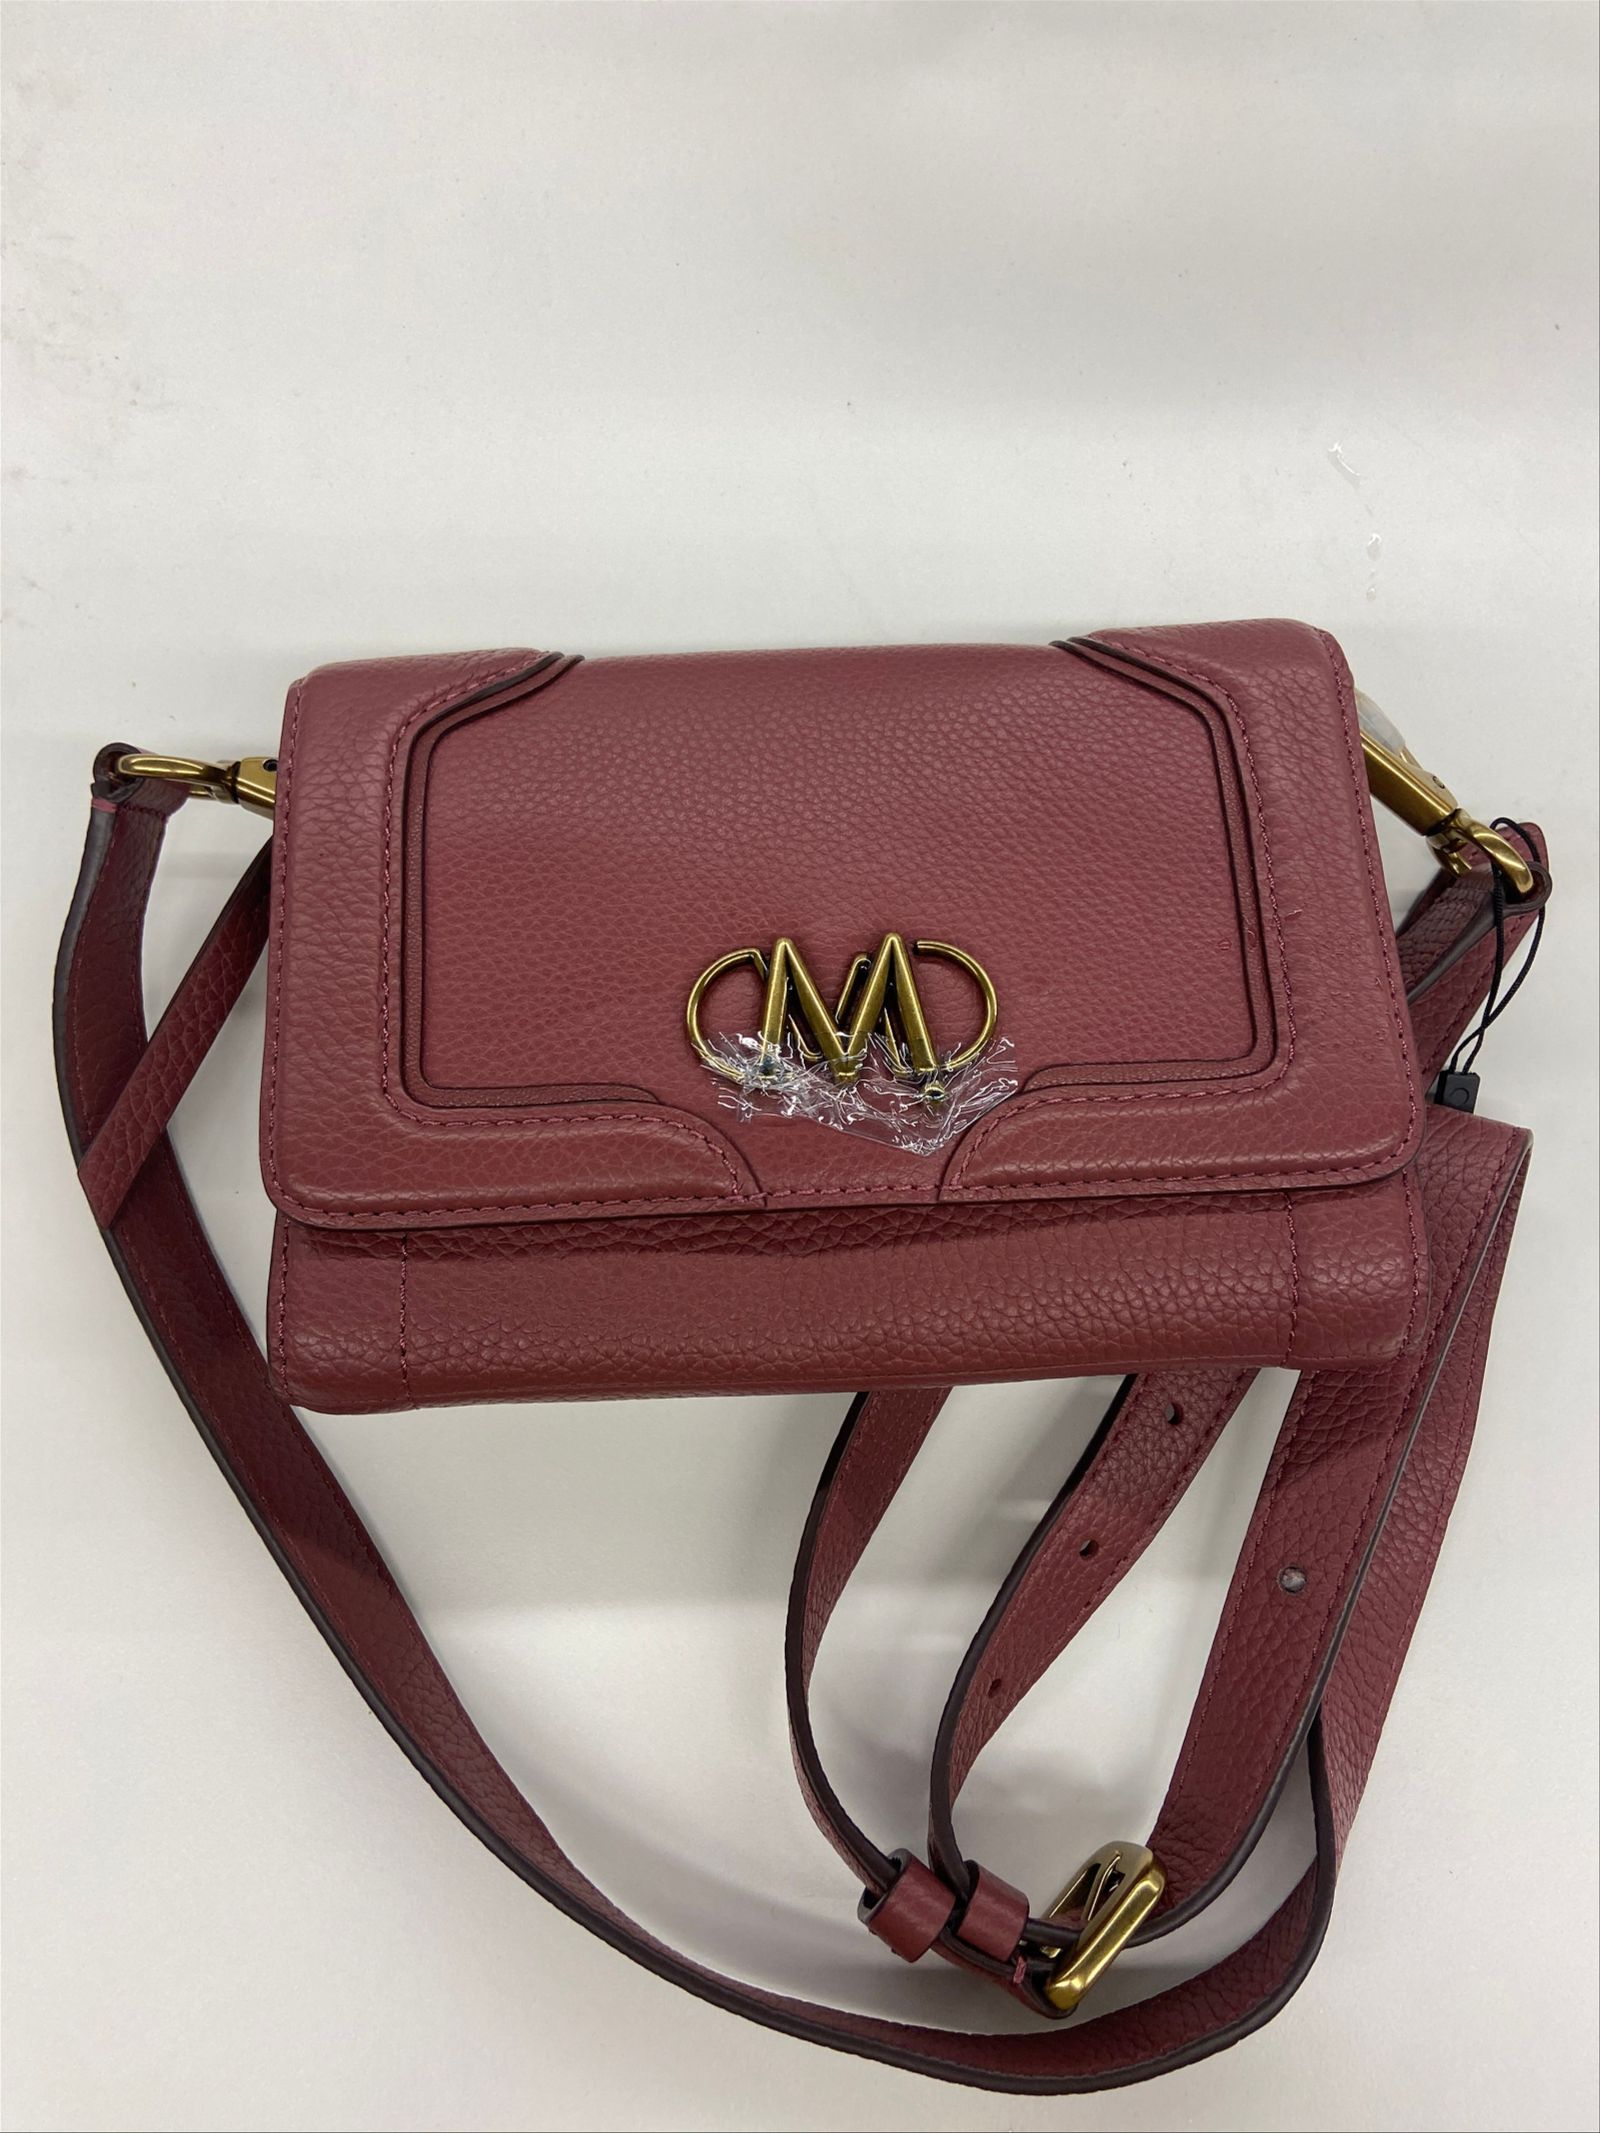 Mimco Unite XL Wallet/Clutch with Matching Strap